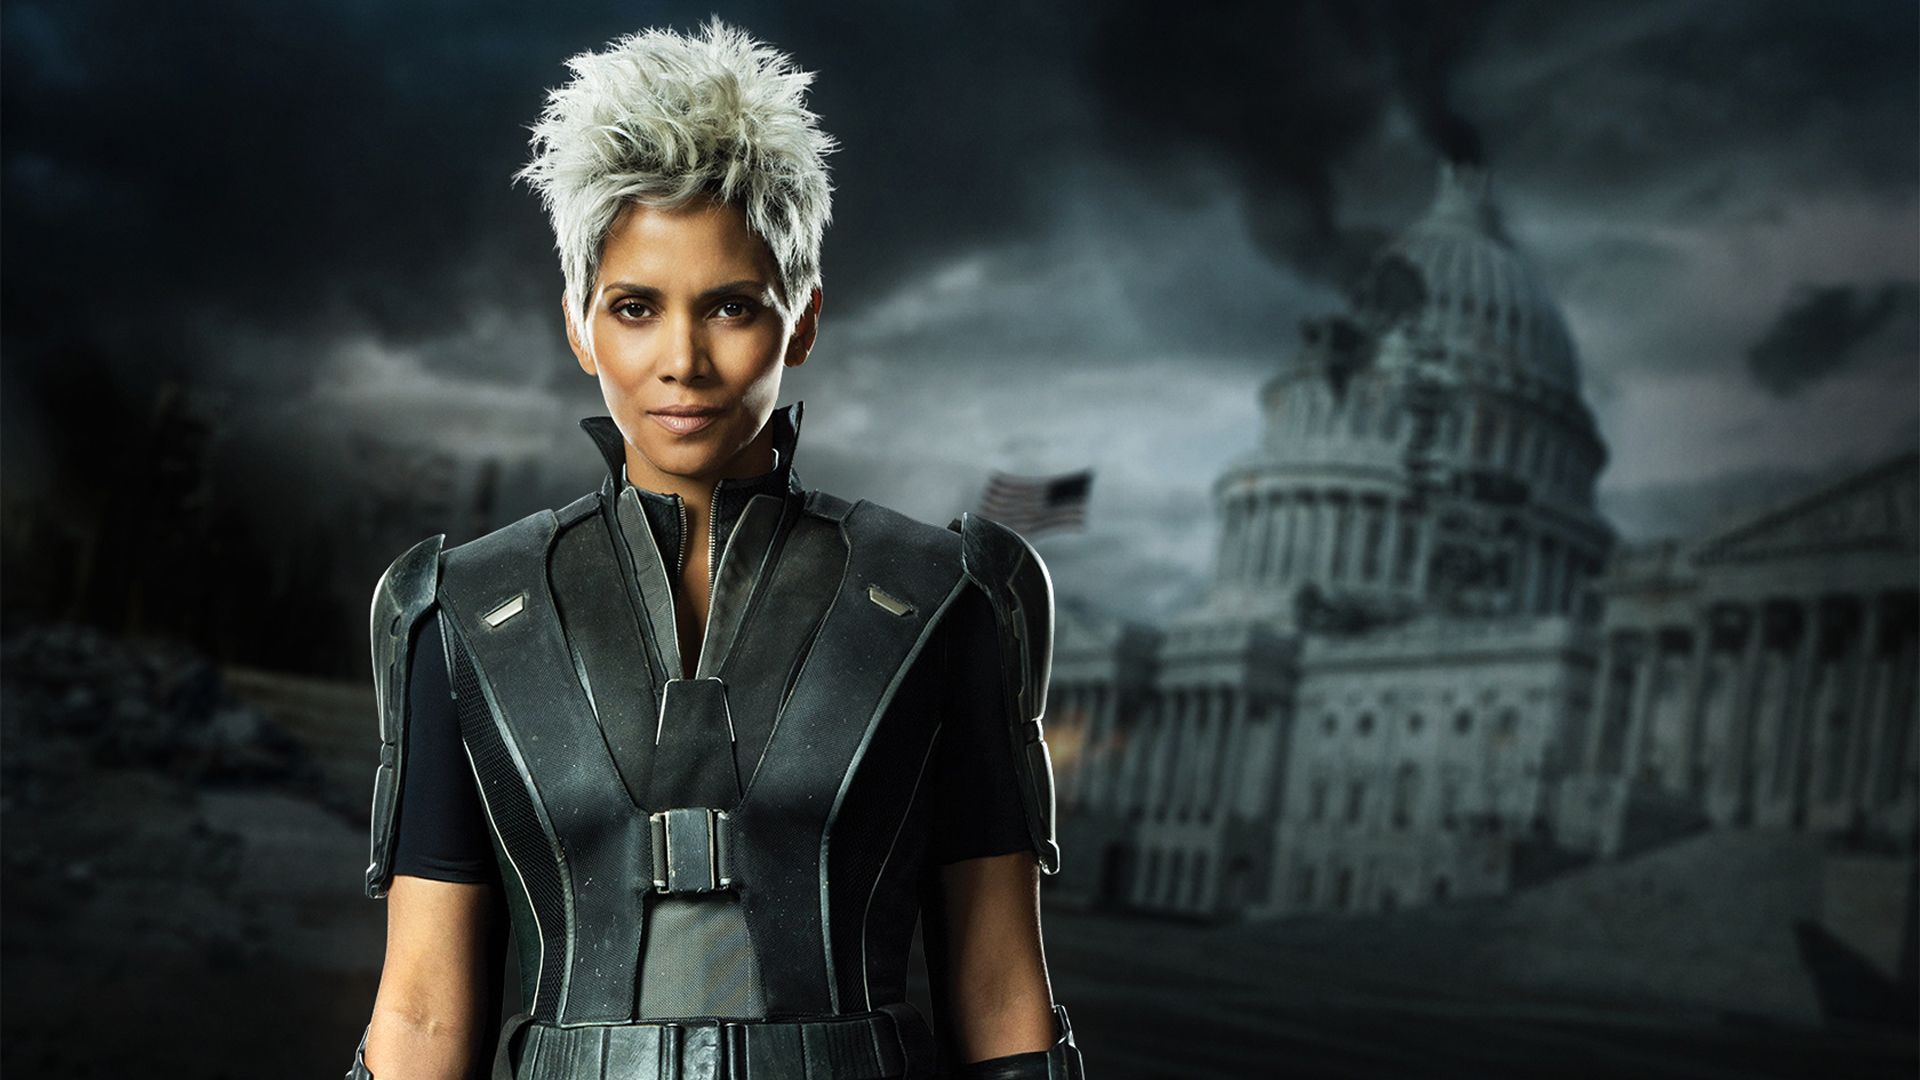 1920x1080 Halle berry, Days of future past, Halle berry storm